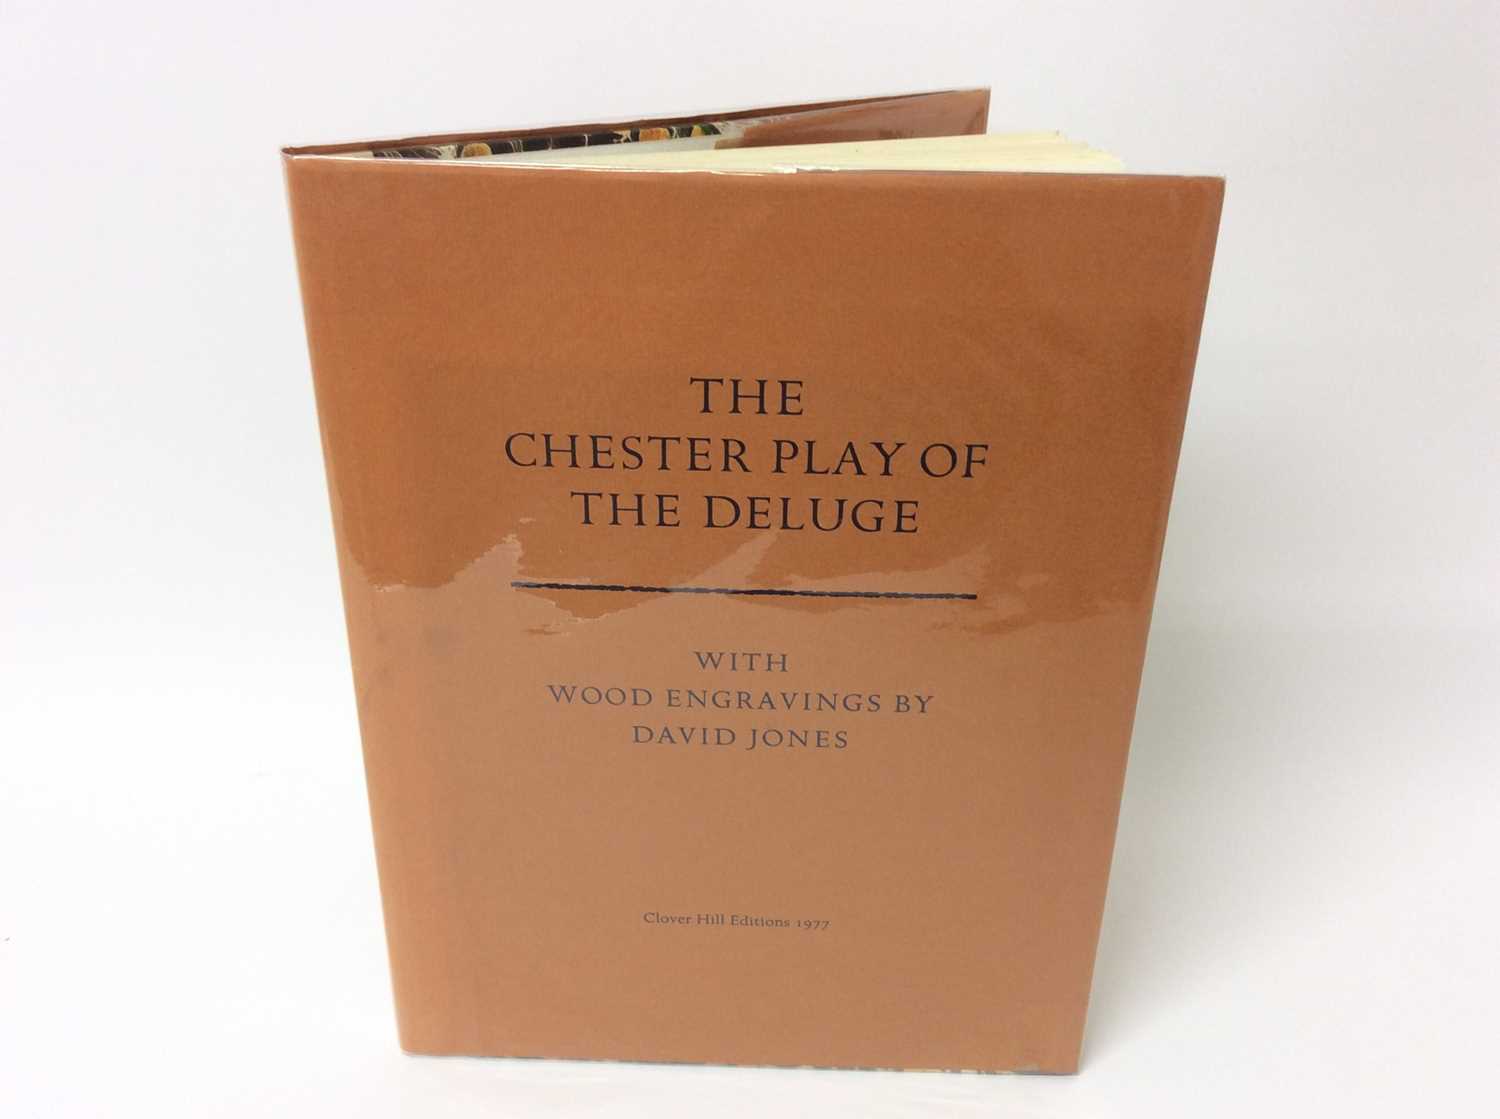 The Chester Play of The Deluge, ill. David Jones, London, Clover Hill Editions, 1977, limited to 250